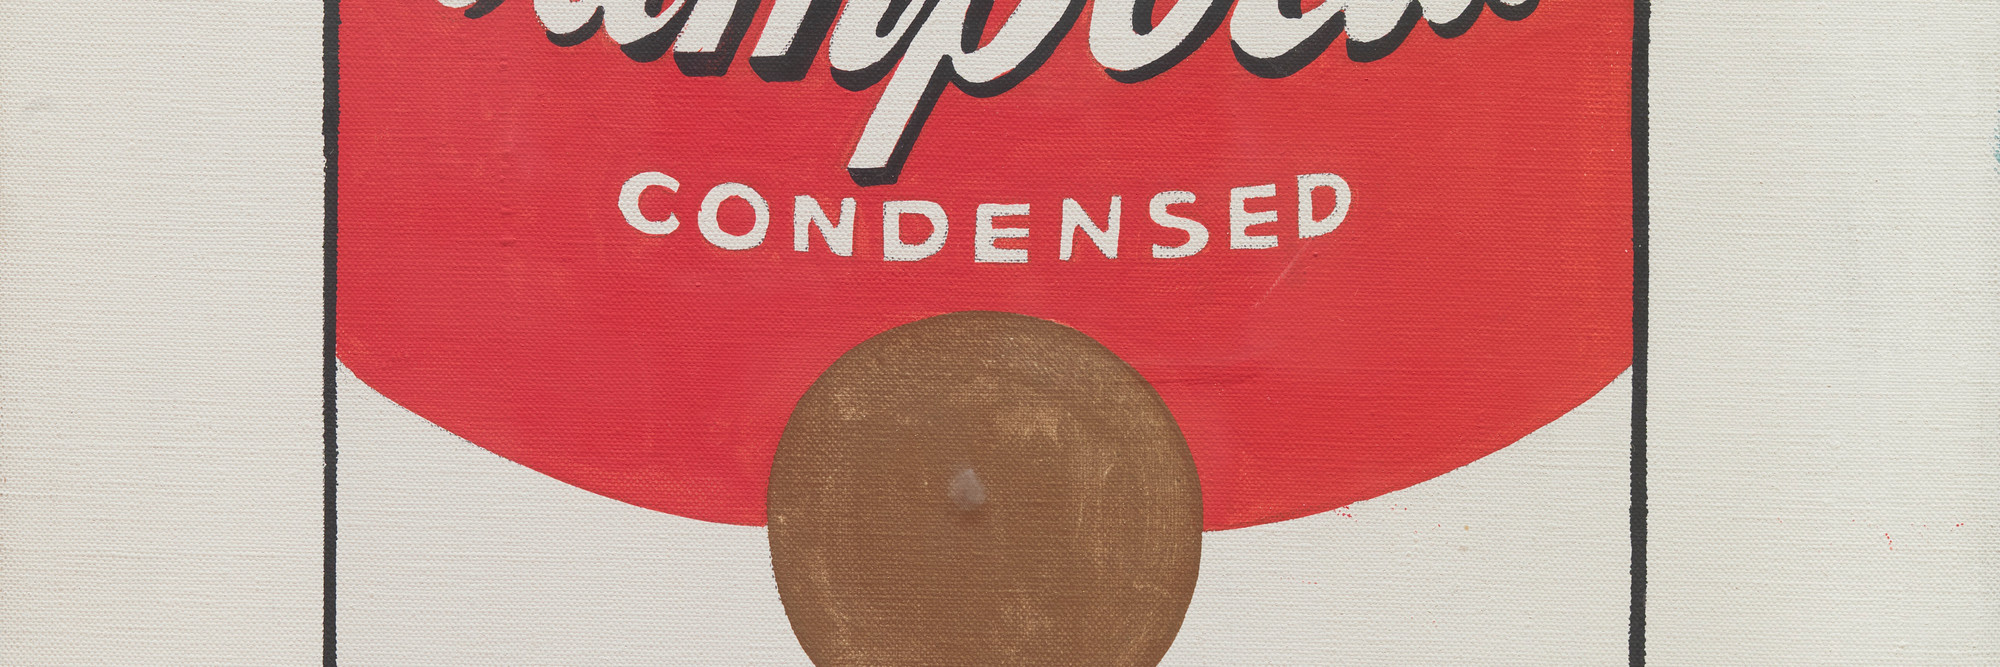 Andy Warhol (American, 1928–1987). Campbell’s Soup Cans (detail). 1962. Synthetic polymer paint on 32 canvases, each 20 × 16″ (50.8 × 40.6 cm). The Museum of Modern Art, New York. Partial gift of Irving Blum. Additional funding provided by Nelson A. Rockefeller Bequest, gift of Mr. and Mrs. William A.M. Burden, Abby Aldrich Rockefeller Fund, gift of Nina and Gordon Bunshaft in honor of Henry Moore, Lillie P. Bliss Bequest, Philip Johnson Fund, Frances R. Keech Bequest, gift of Mrs. Bliss Parkinson, and Florence B. Wesley Bequest (all by exchange)